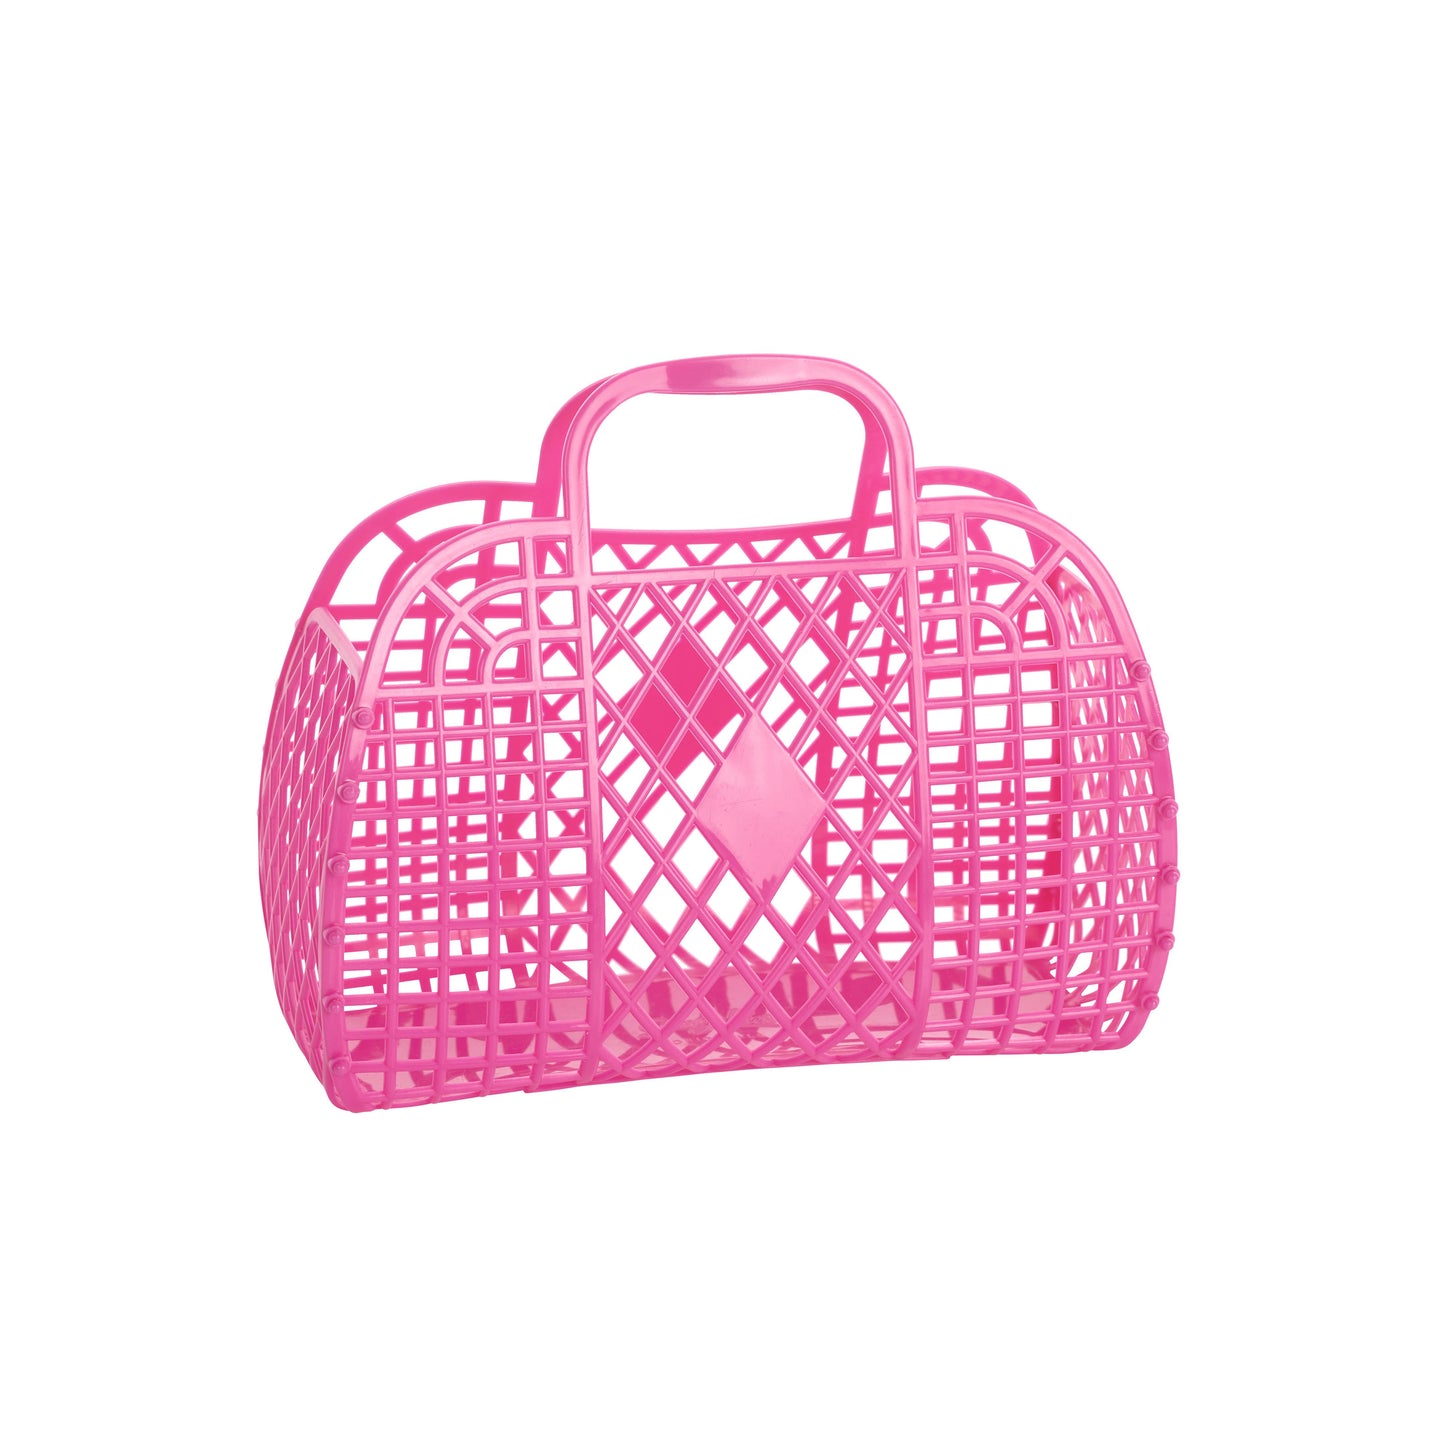 Retro Basket Jelly Bag - Small Berry Pink